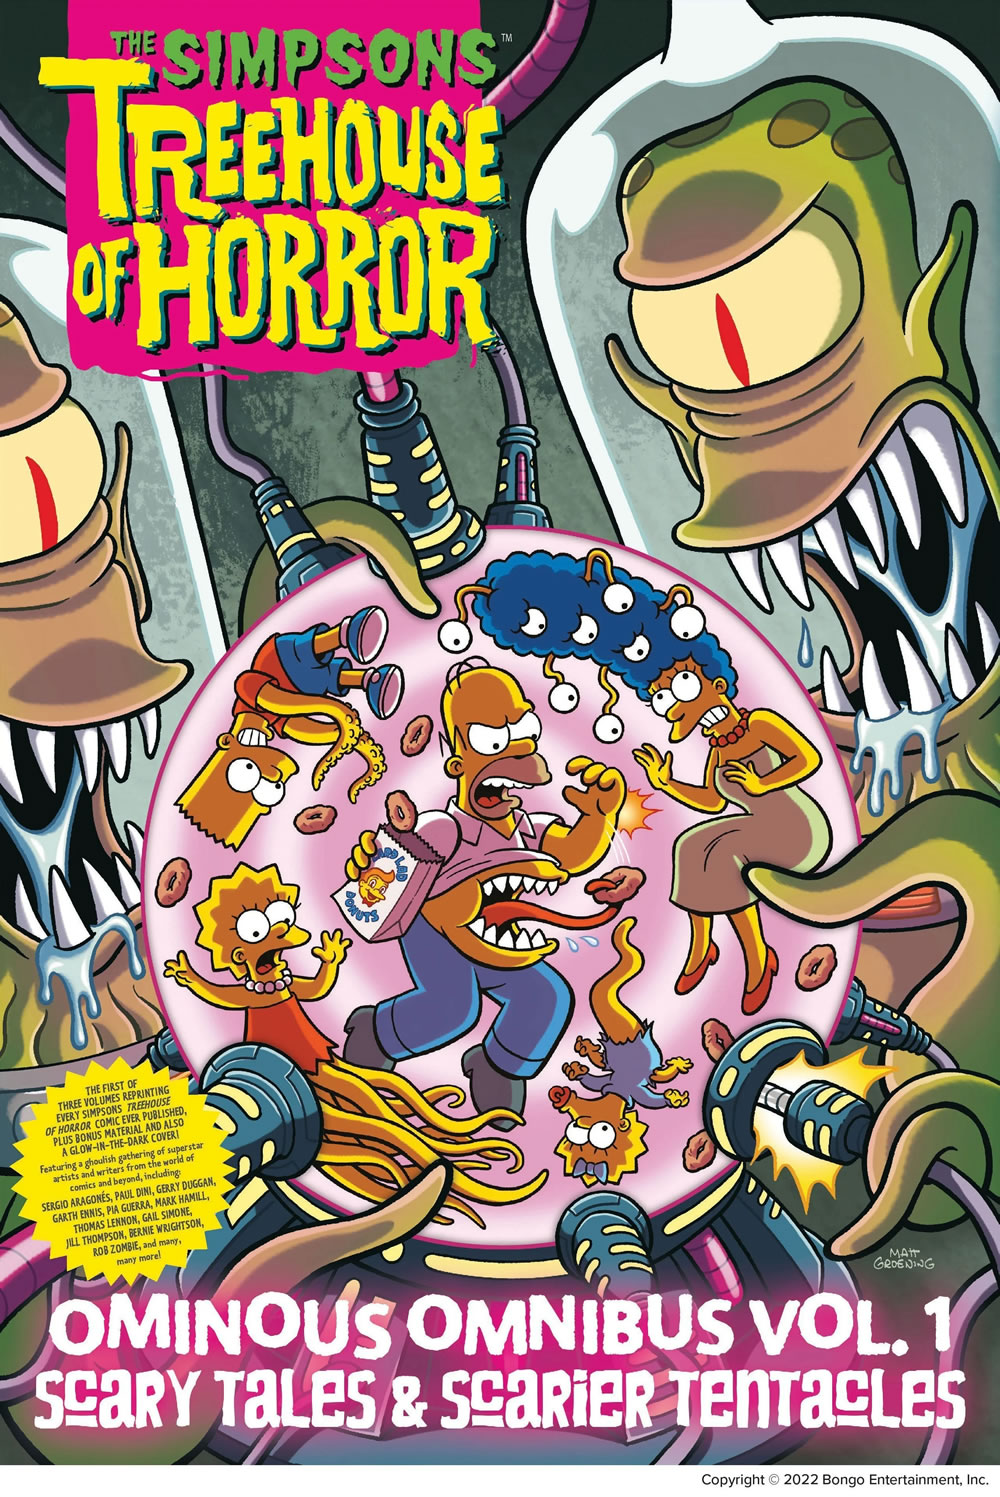 "The Simpsons Treehouse of Horror Ominous Omnibus Vol. 1: Scary Tales & Scarier Tentacles"